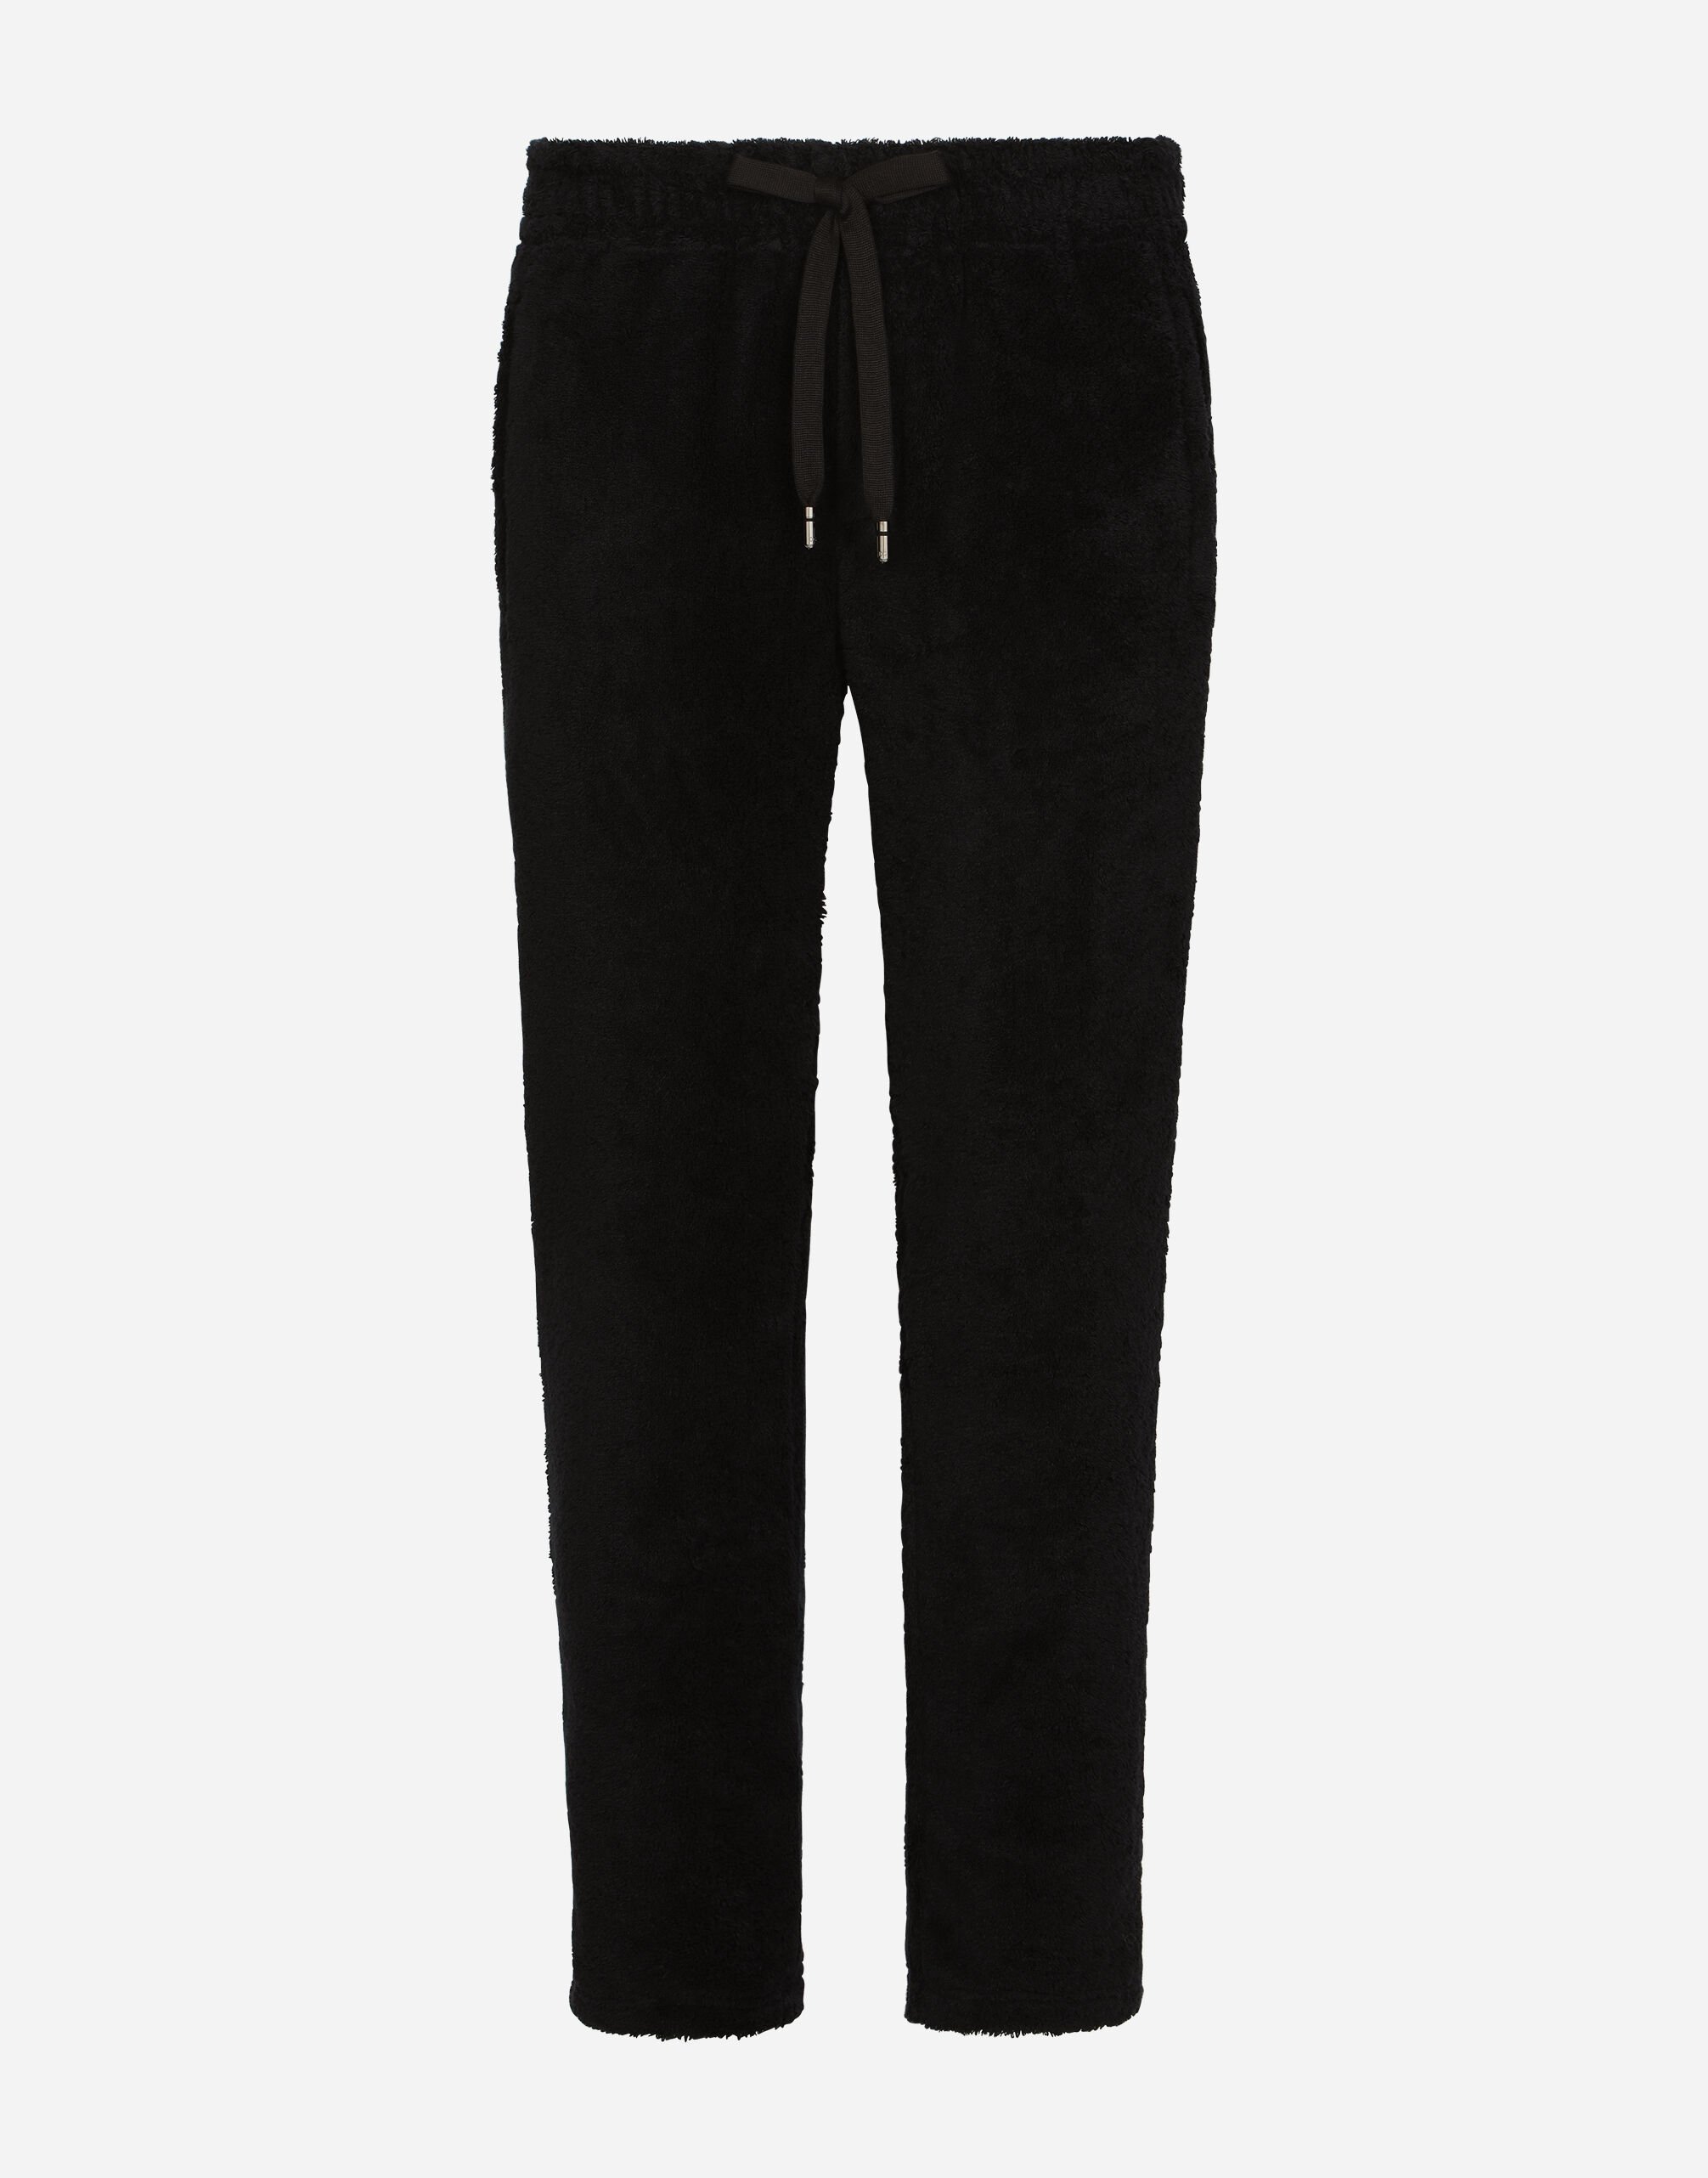 Dolce & Gabbana Terrycloth jogging pants with tag Black G9AHFTGG065